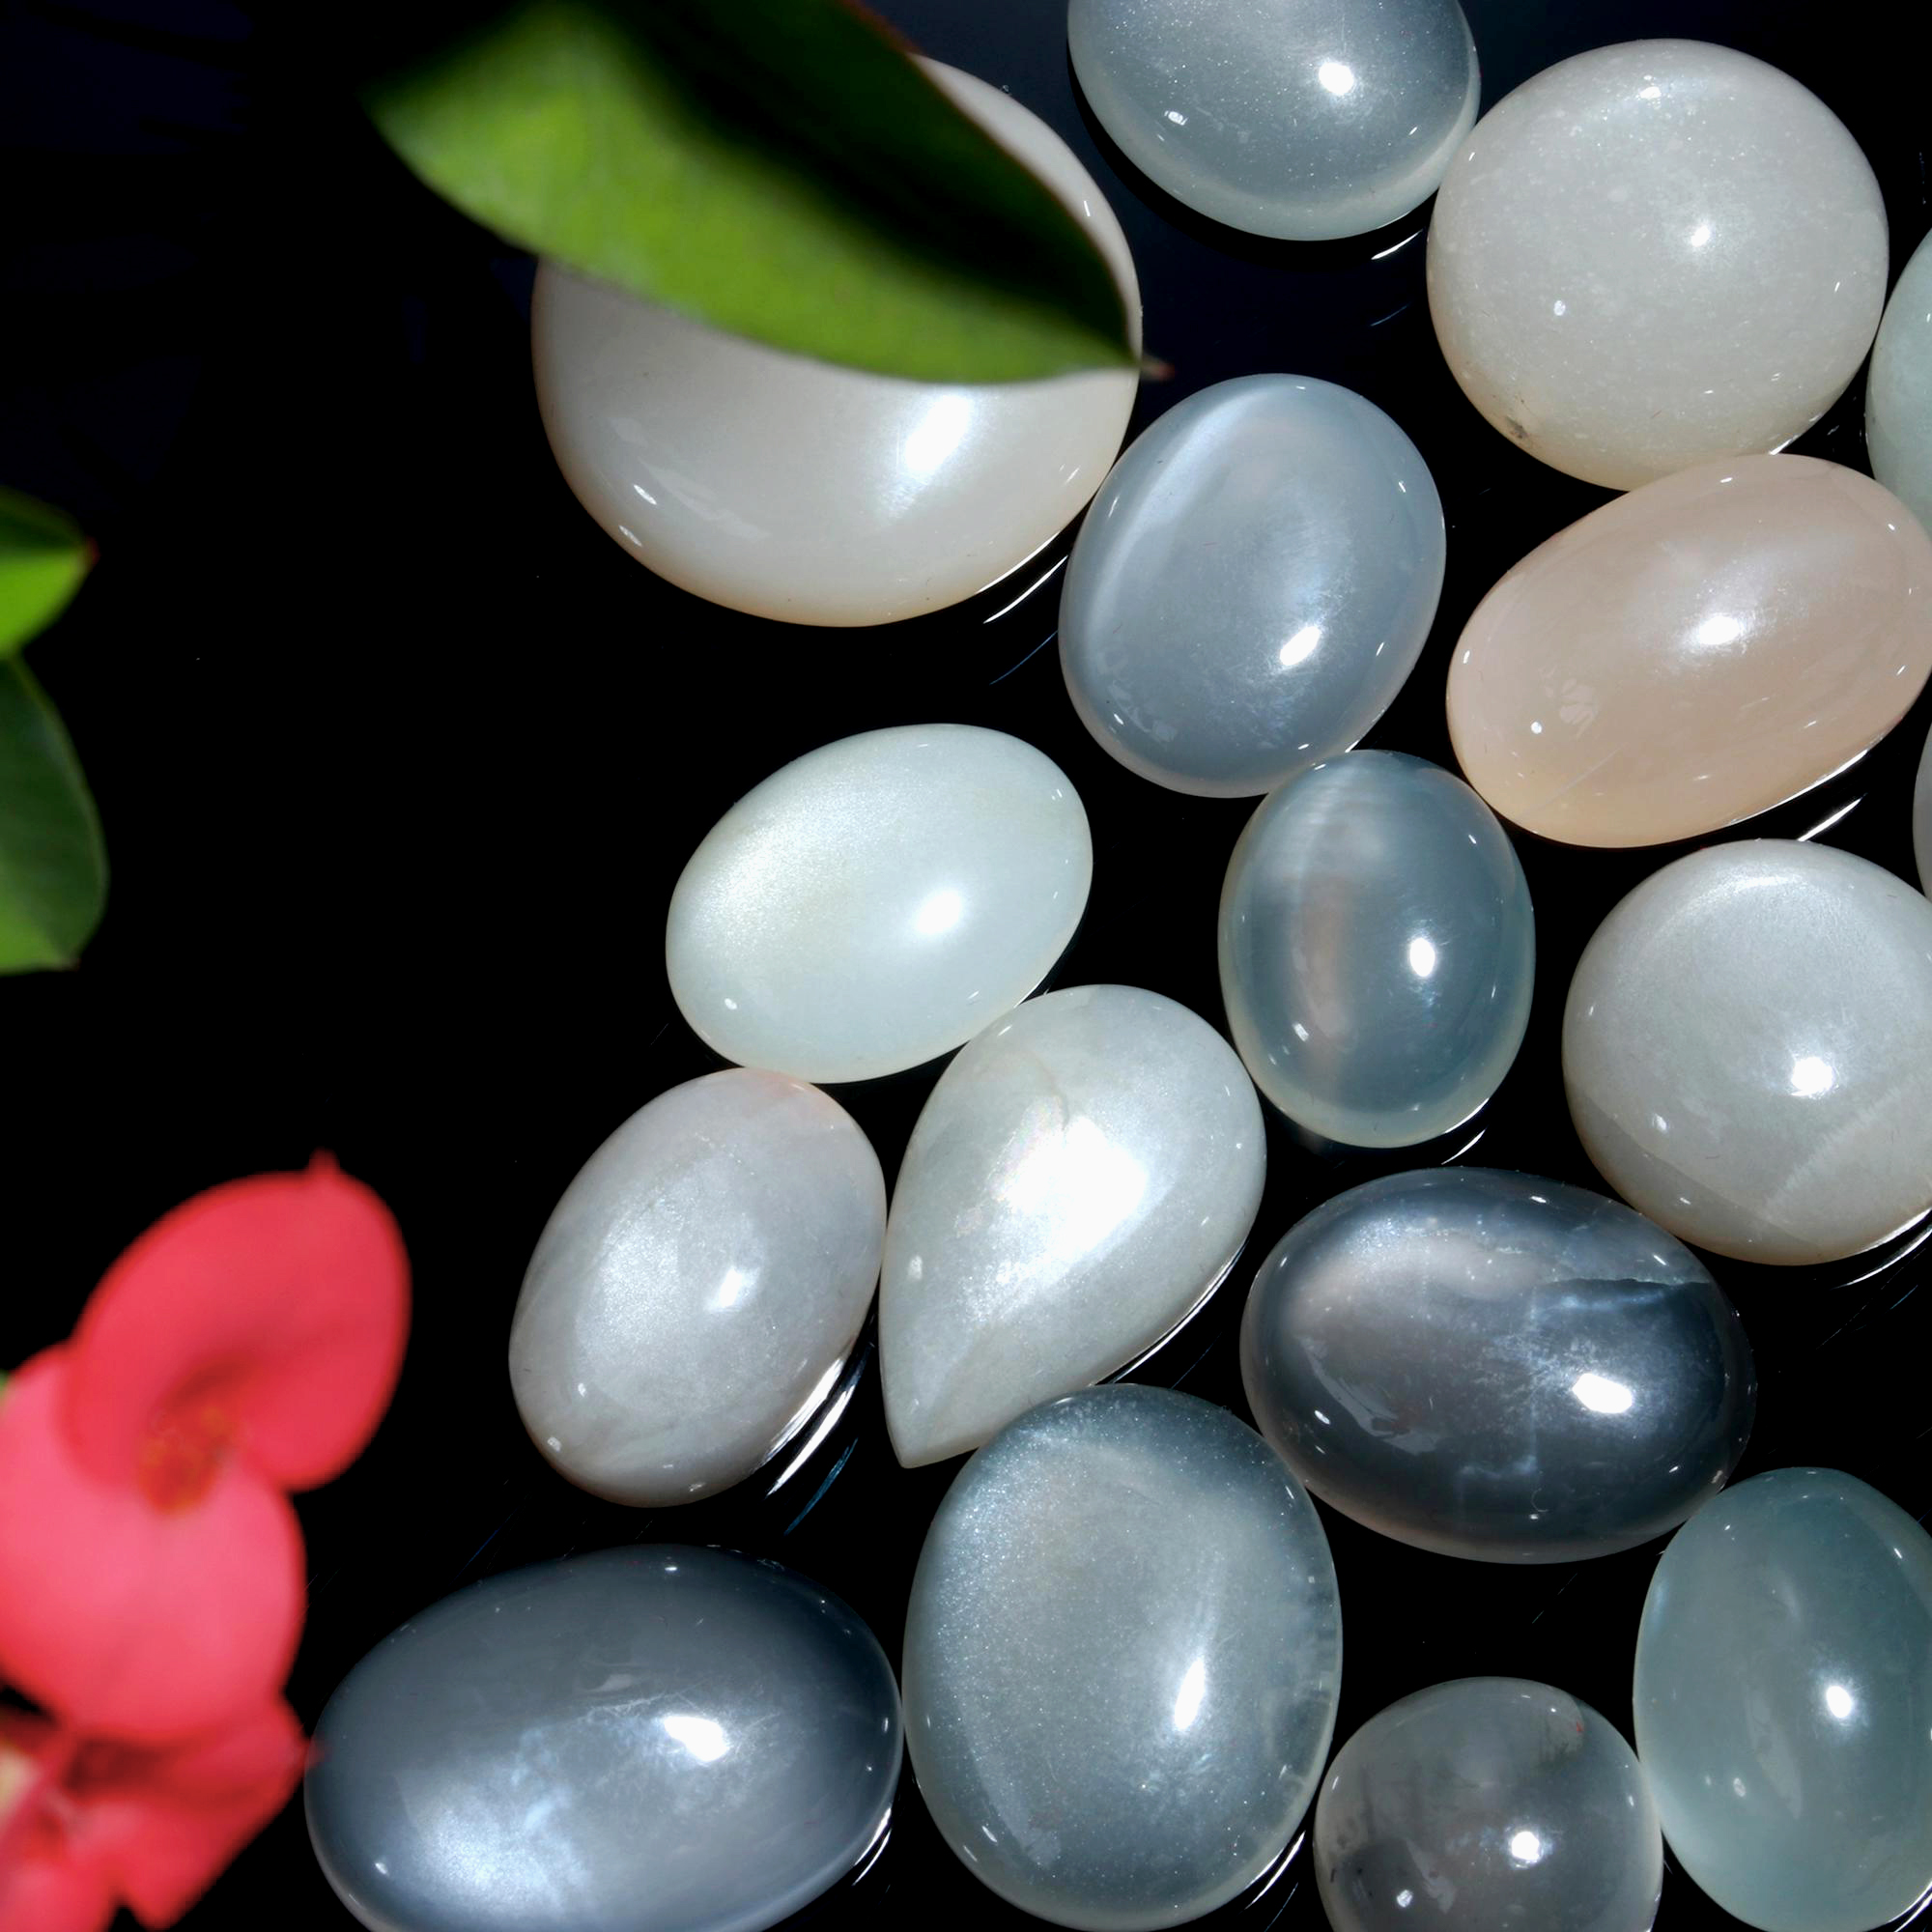 20 Pcs. 222Cts. Natural Grey Rainbow Moonstone polished Mix Cabochon Wholesale Loose Lot Size 22x18 16x12mm Gemstone for jewelry